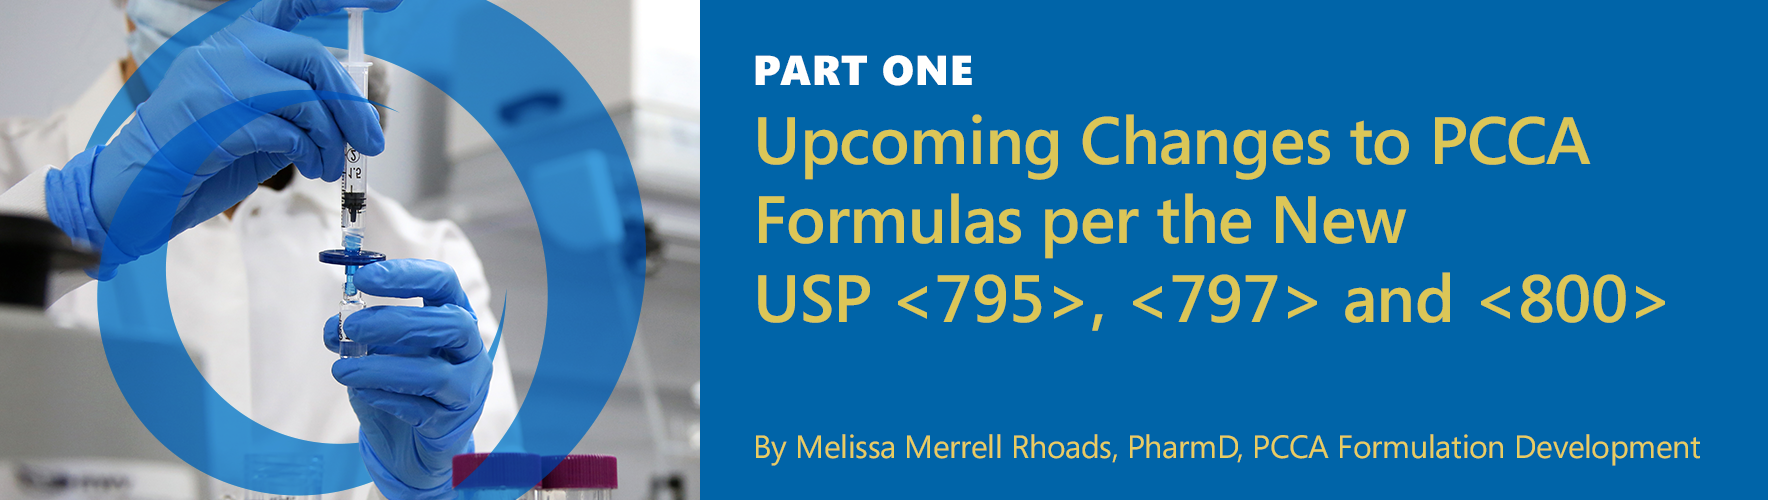 Upcoming_Changes_to_PCCA_Formulas_per_the_New_USP_795_797_and_800_Part_One.png